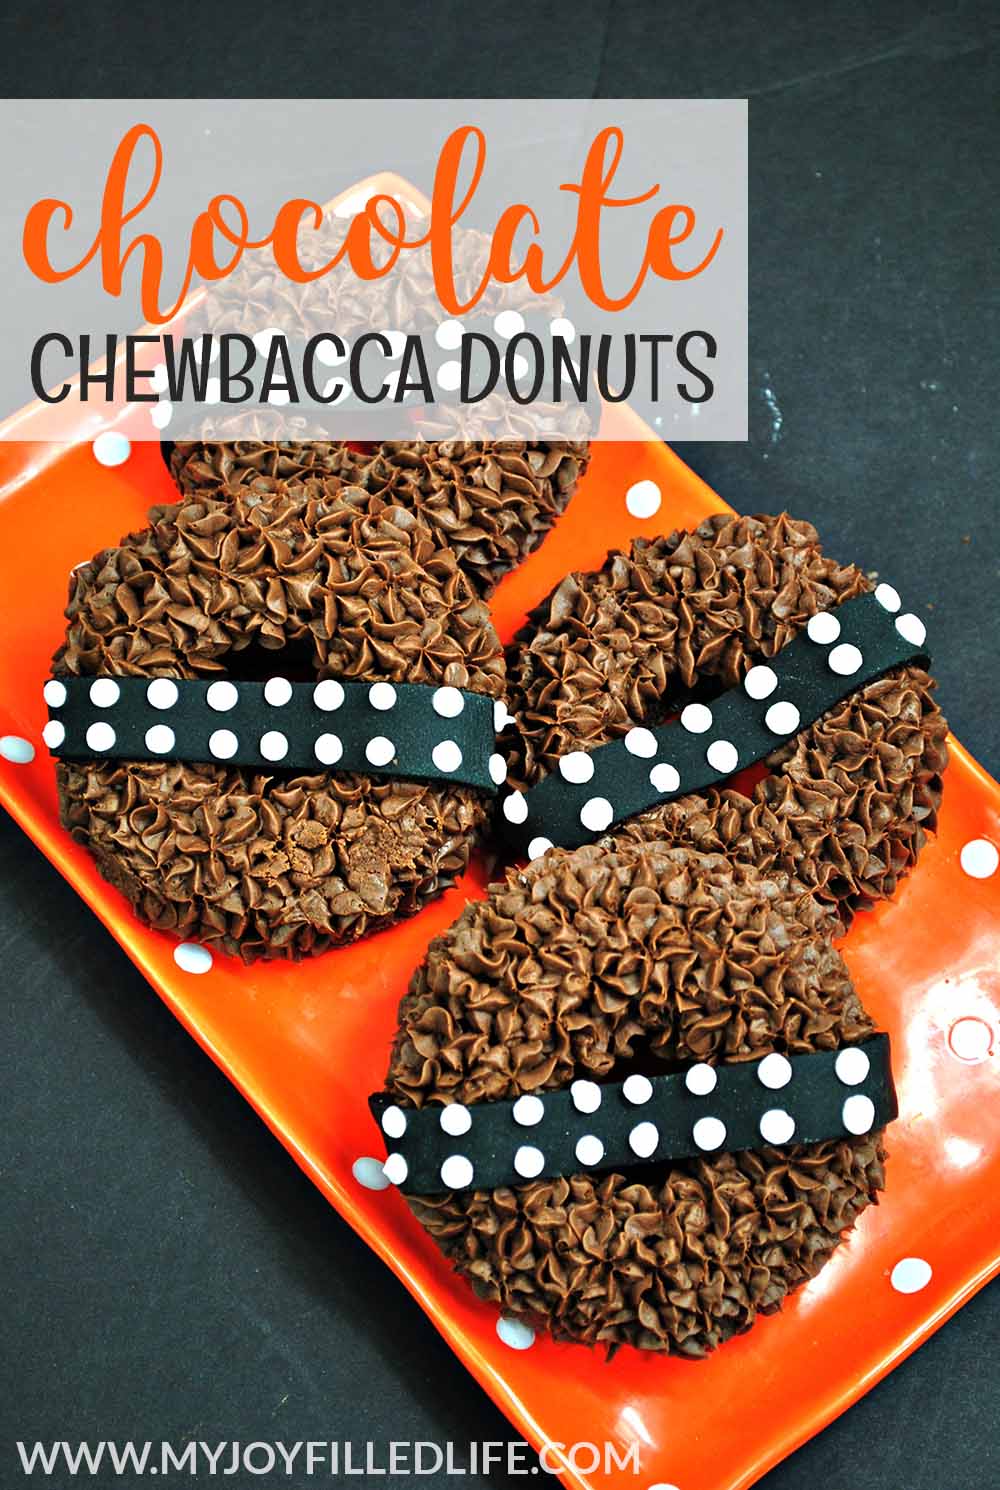 Chocolate Chewbacca Donuts from My Joy-Filled Life